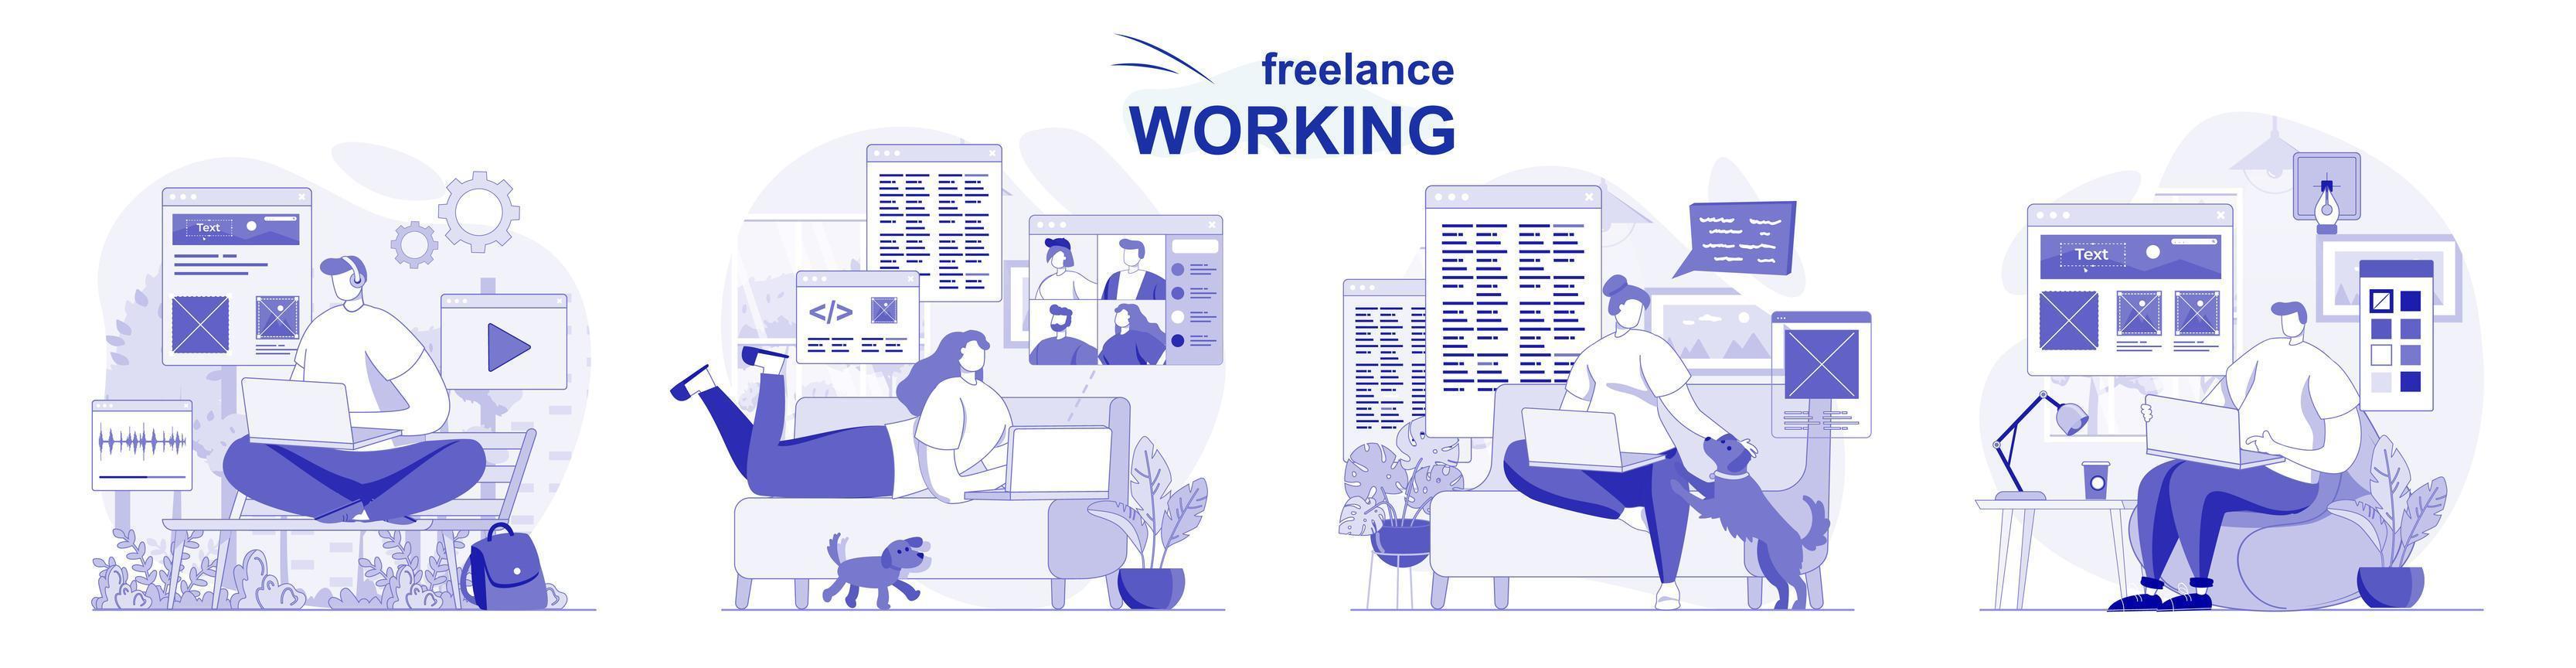 Freelance working isolated set in flat design. People dong remote work on laptops from home office, collection of scenes. Vector illustration for blogging, website, mobile app, promotional materials.